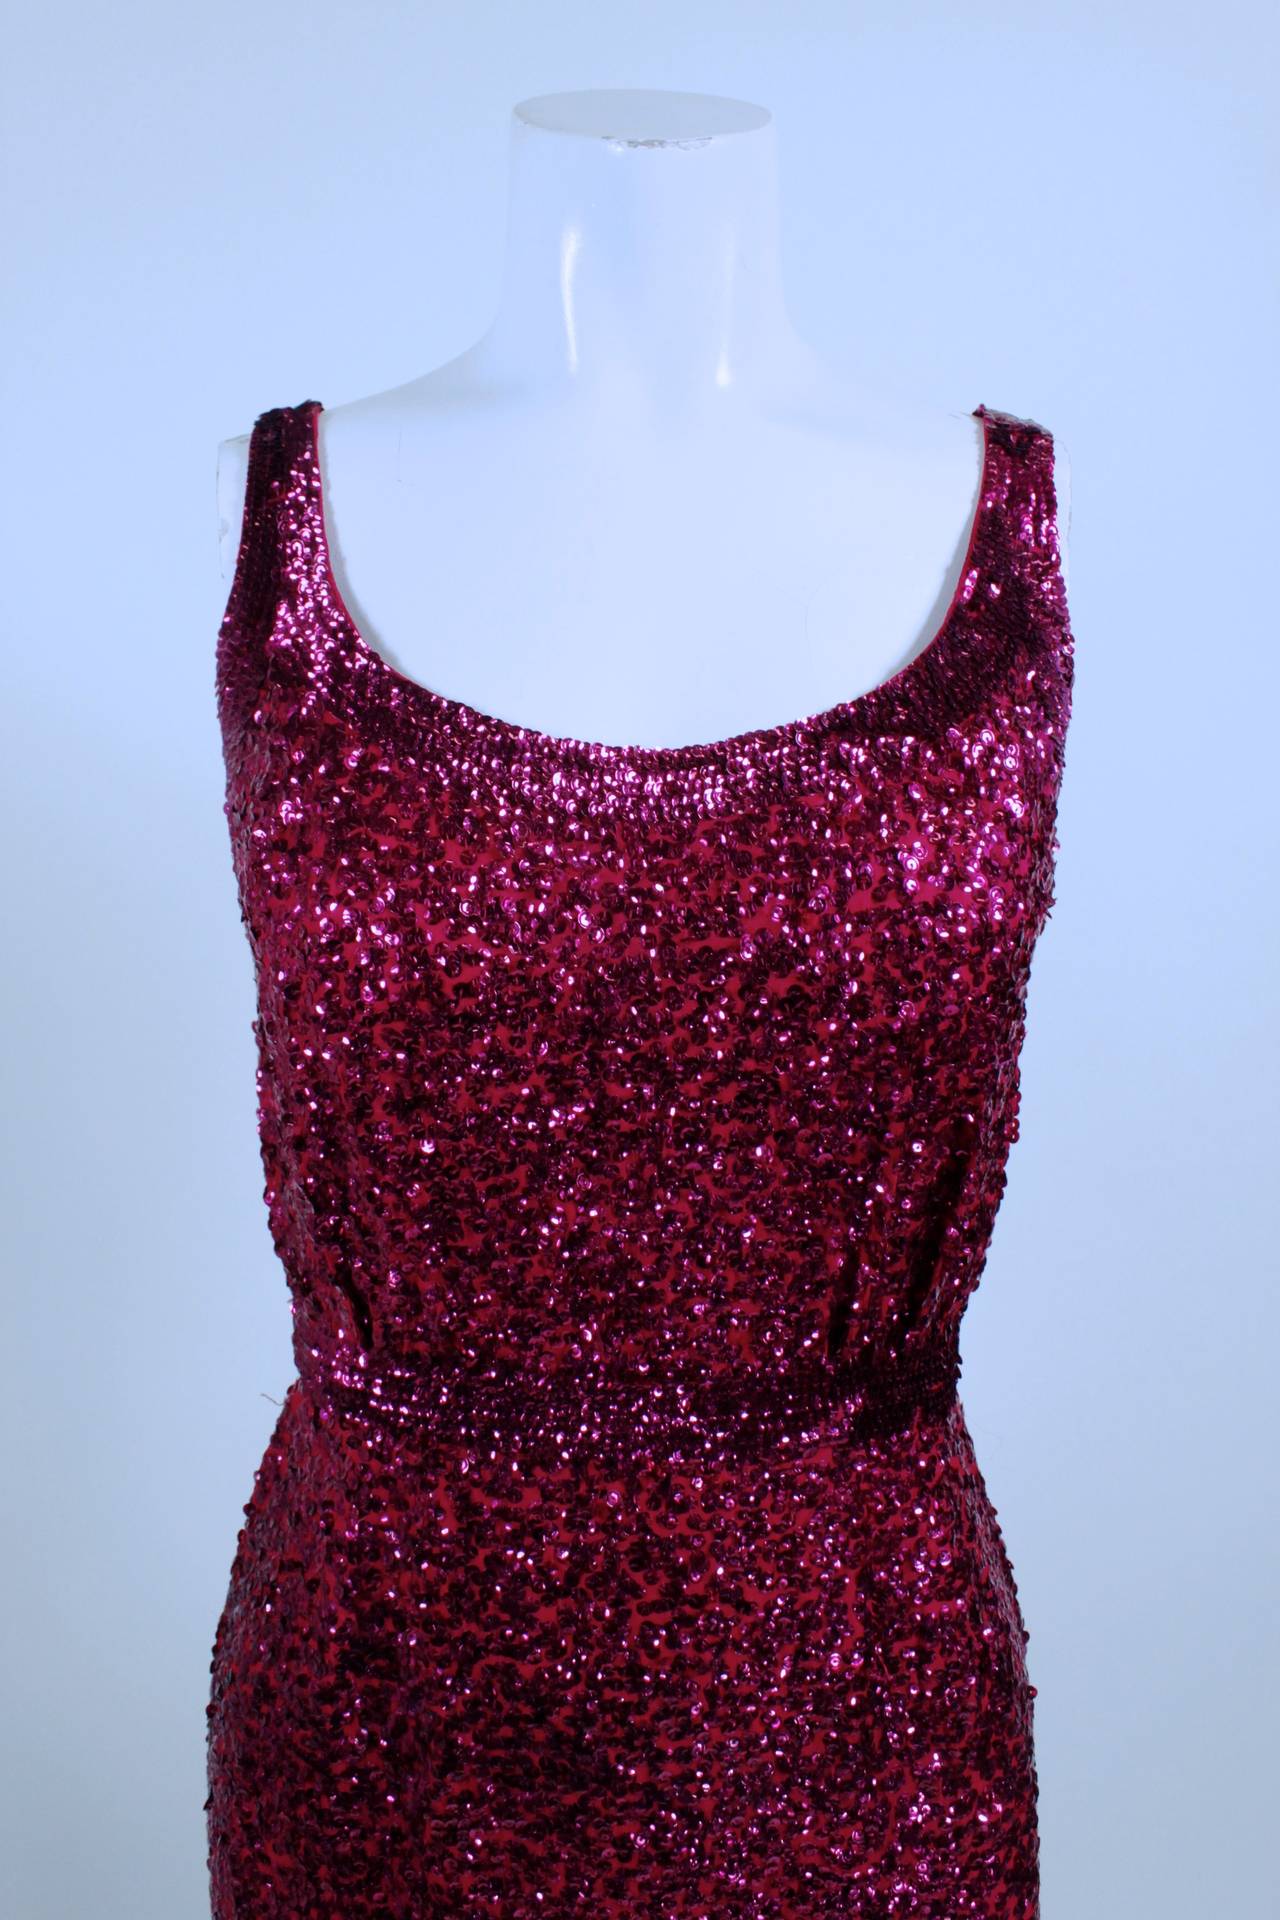 This gorgeous gown is evocative the iconic Norman Norell “mermaid” look. A luxe raspberry silk crepe sheath is covered in hand-sewn sequins, adding glimmer, texture, and glamour. The gown is fully lined, and zips in back. Please note that because